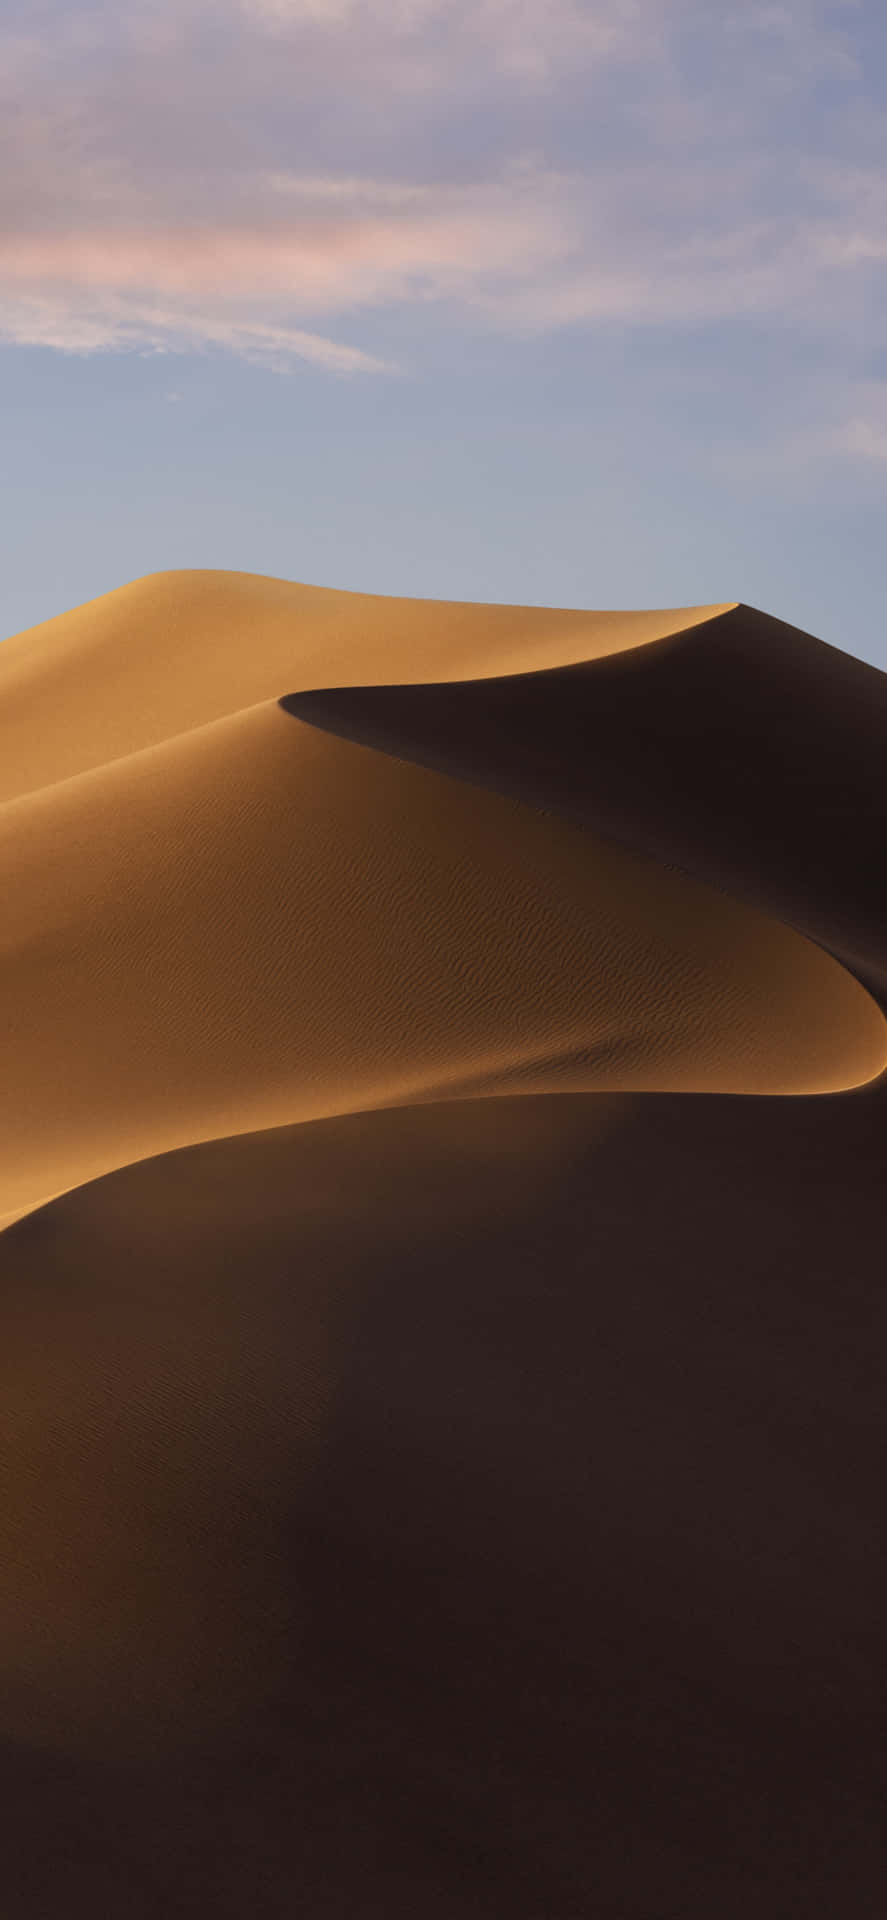 Experience The Beauty Of The Desert With An Iphone Wallpaper